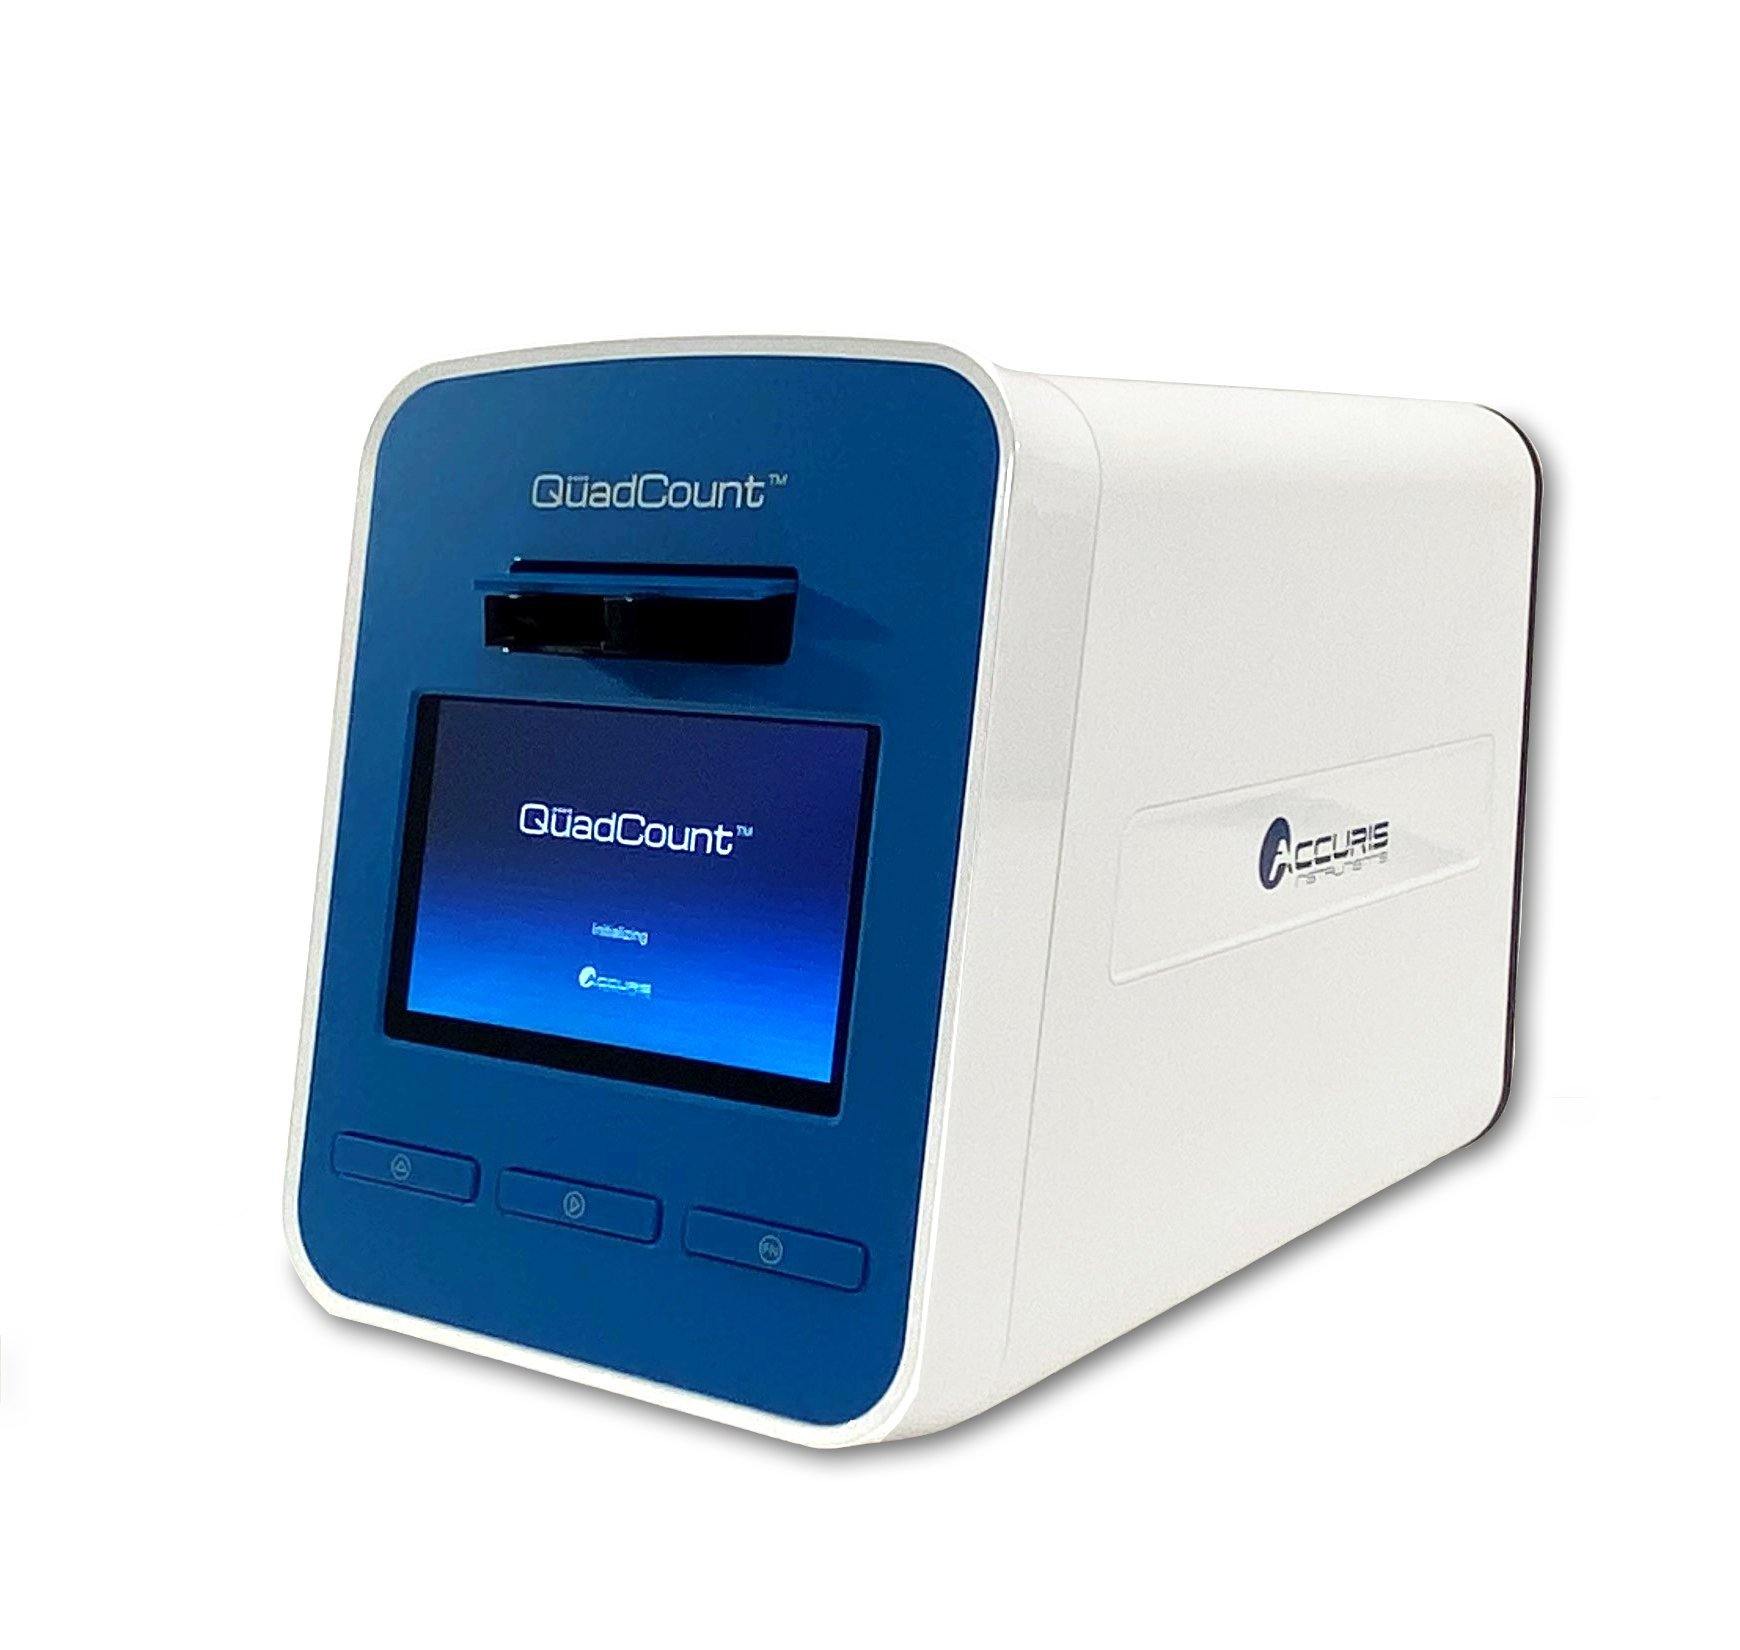 Benchmark E7500 QuadCount Automated Cell Counter With Touch Screen Interface